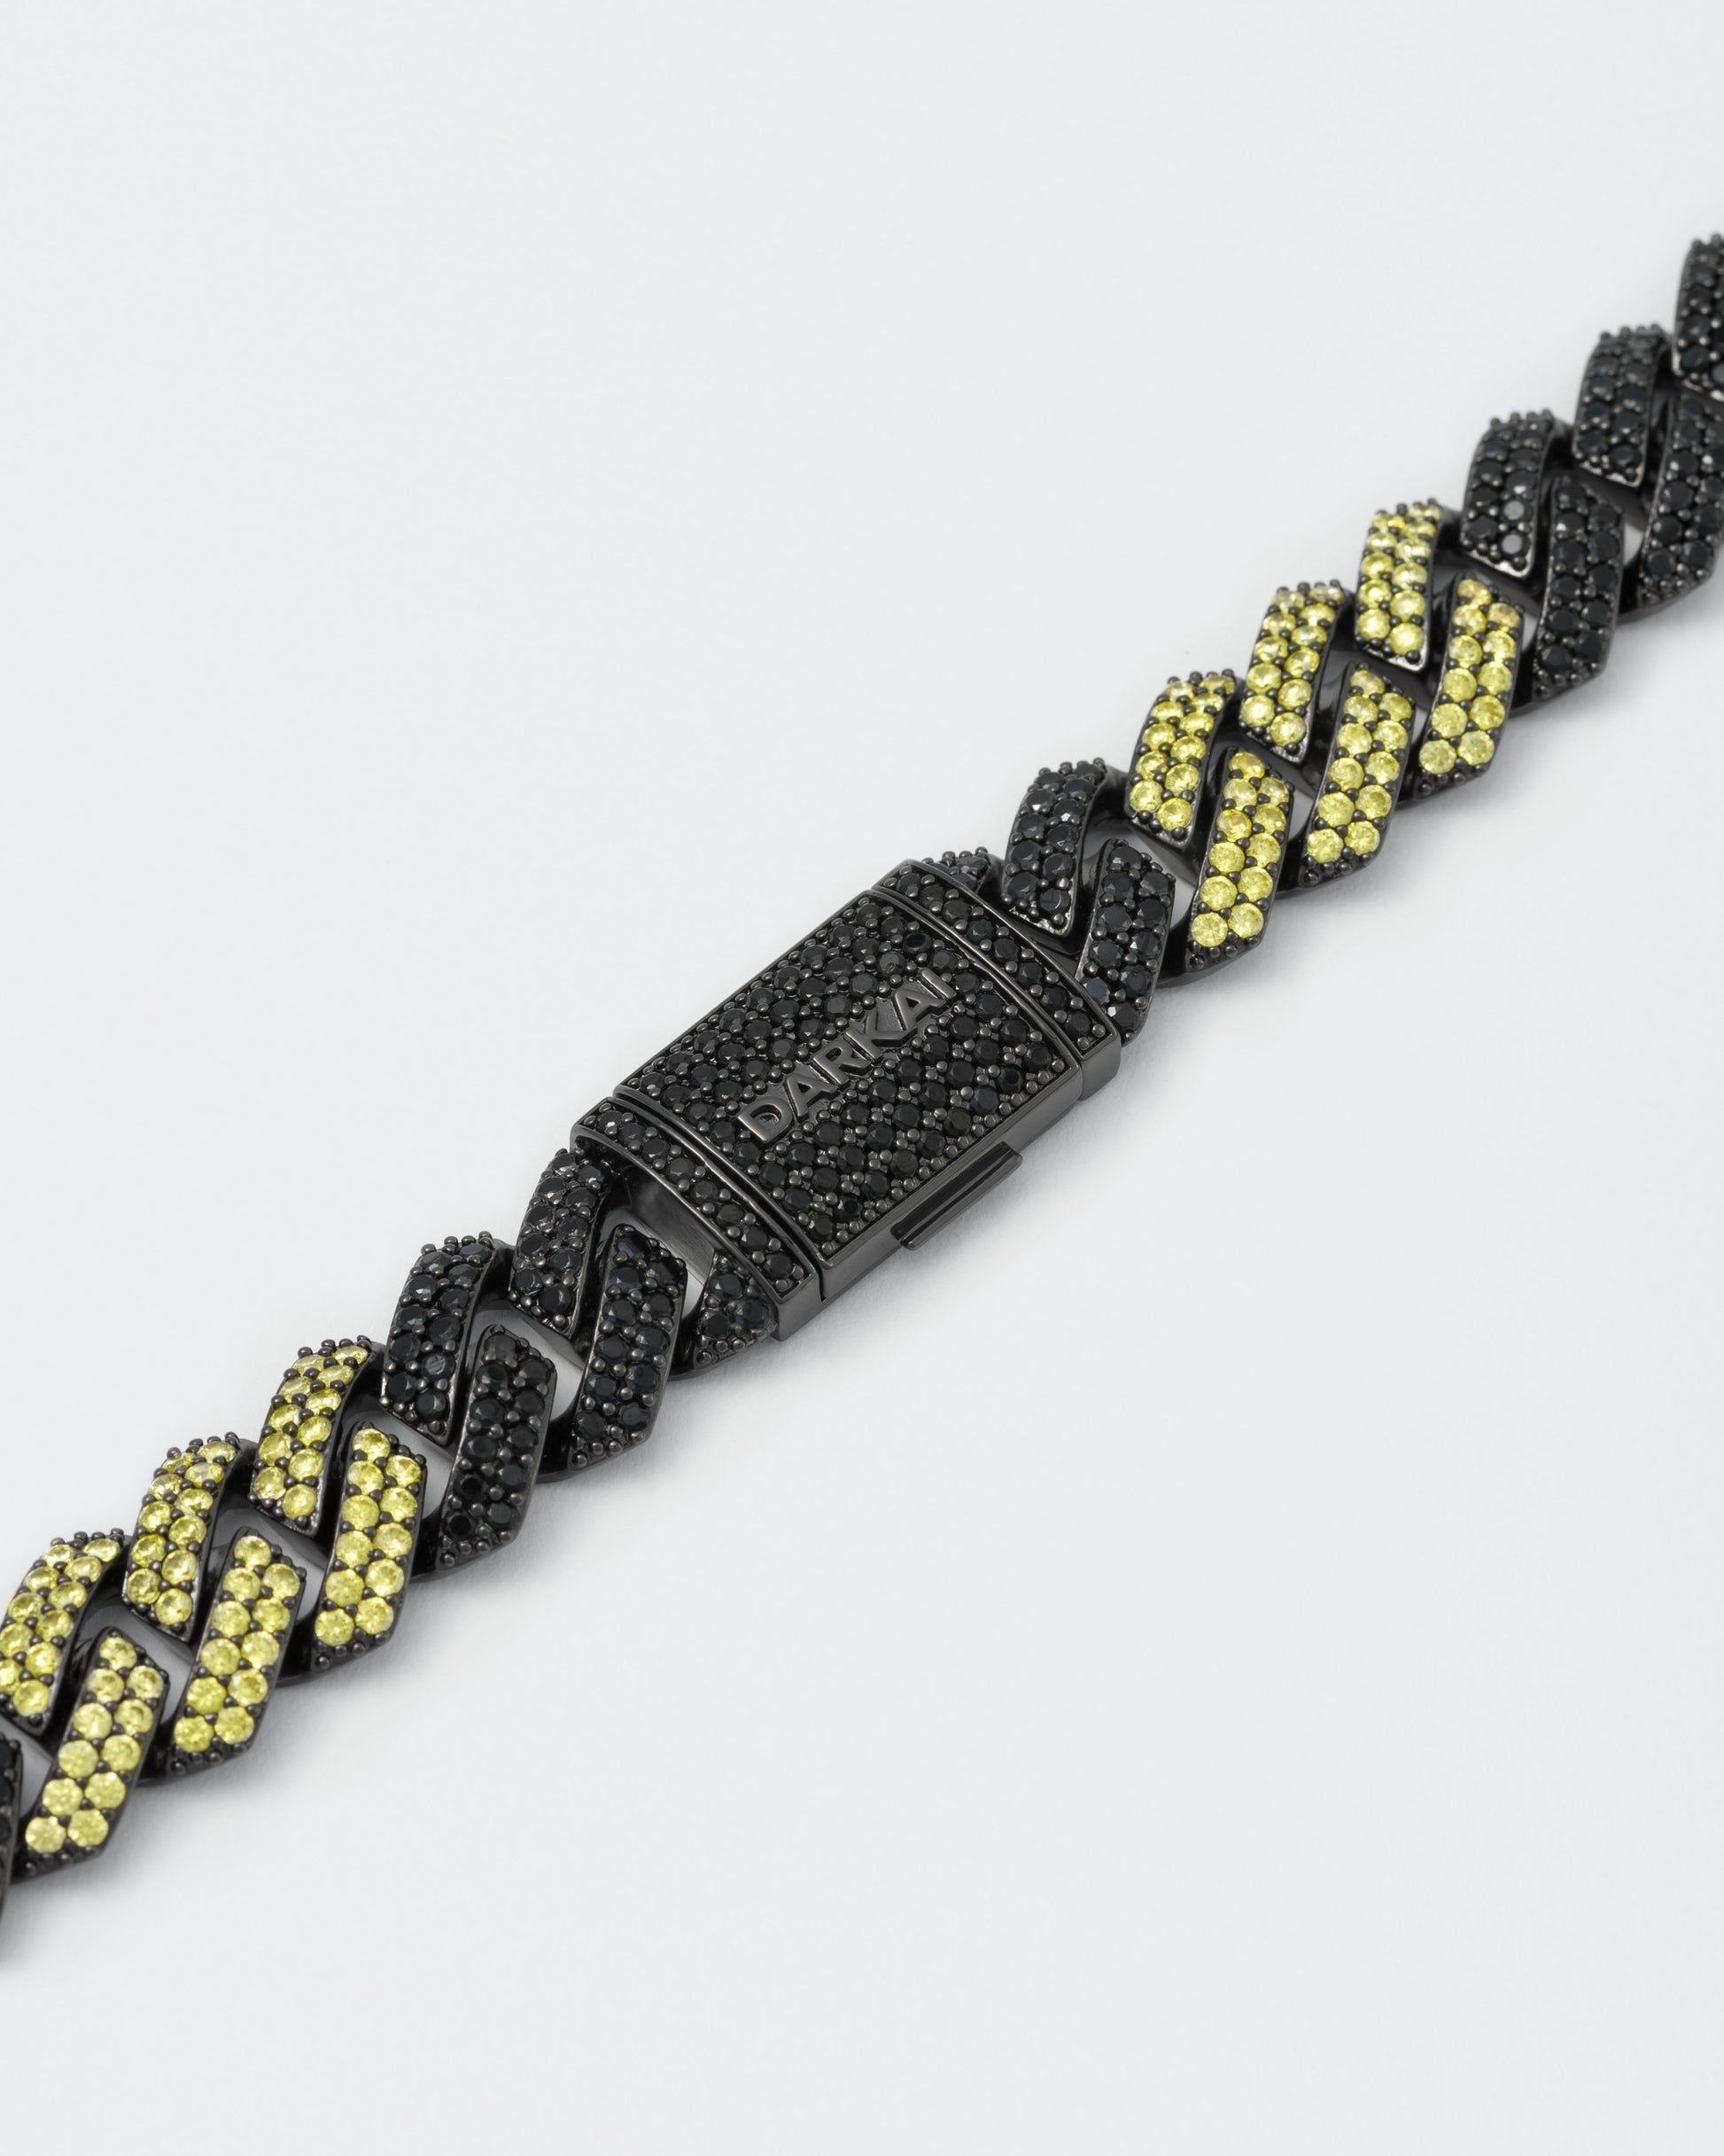 detail of prong chain necklace with deep black PVD coating and hand-set micropavé stones in black and golden yellow. Fine jewelry grade drawer closure with logo